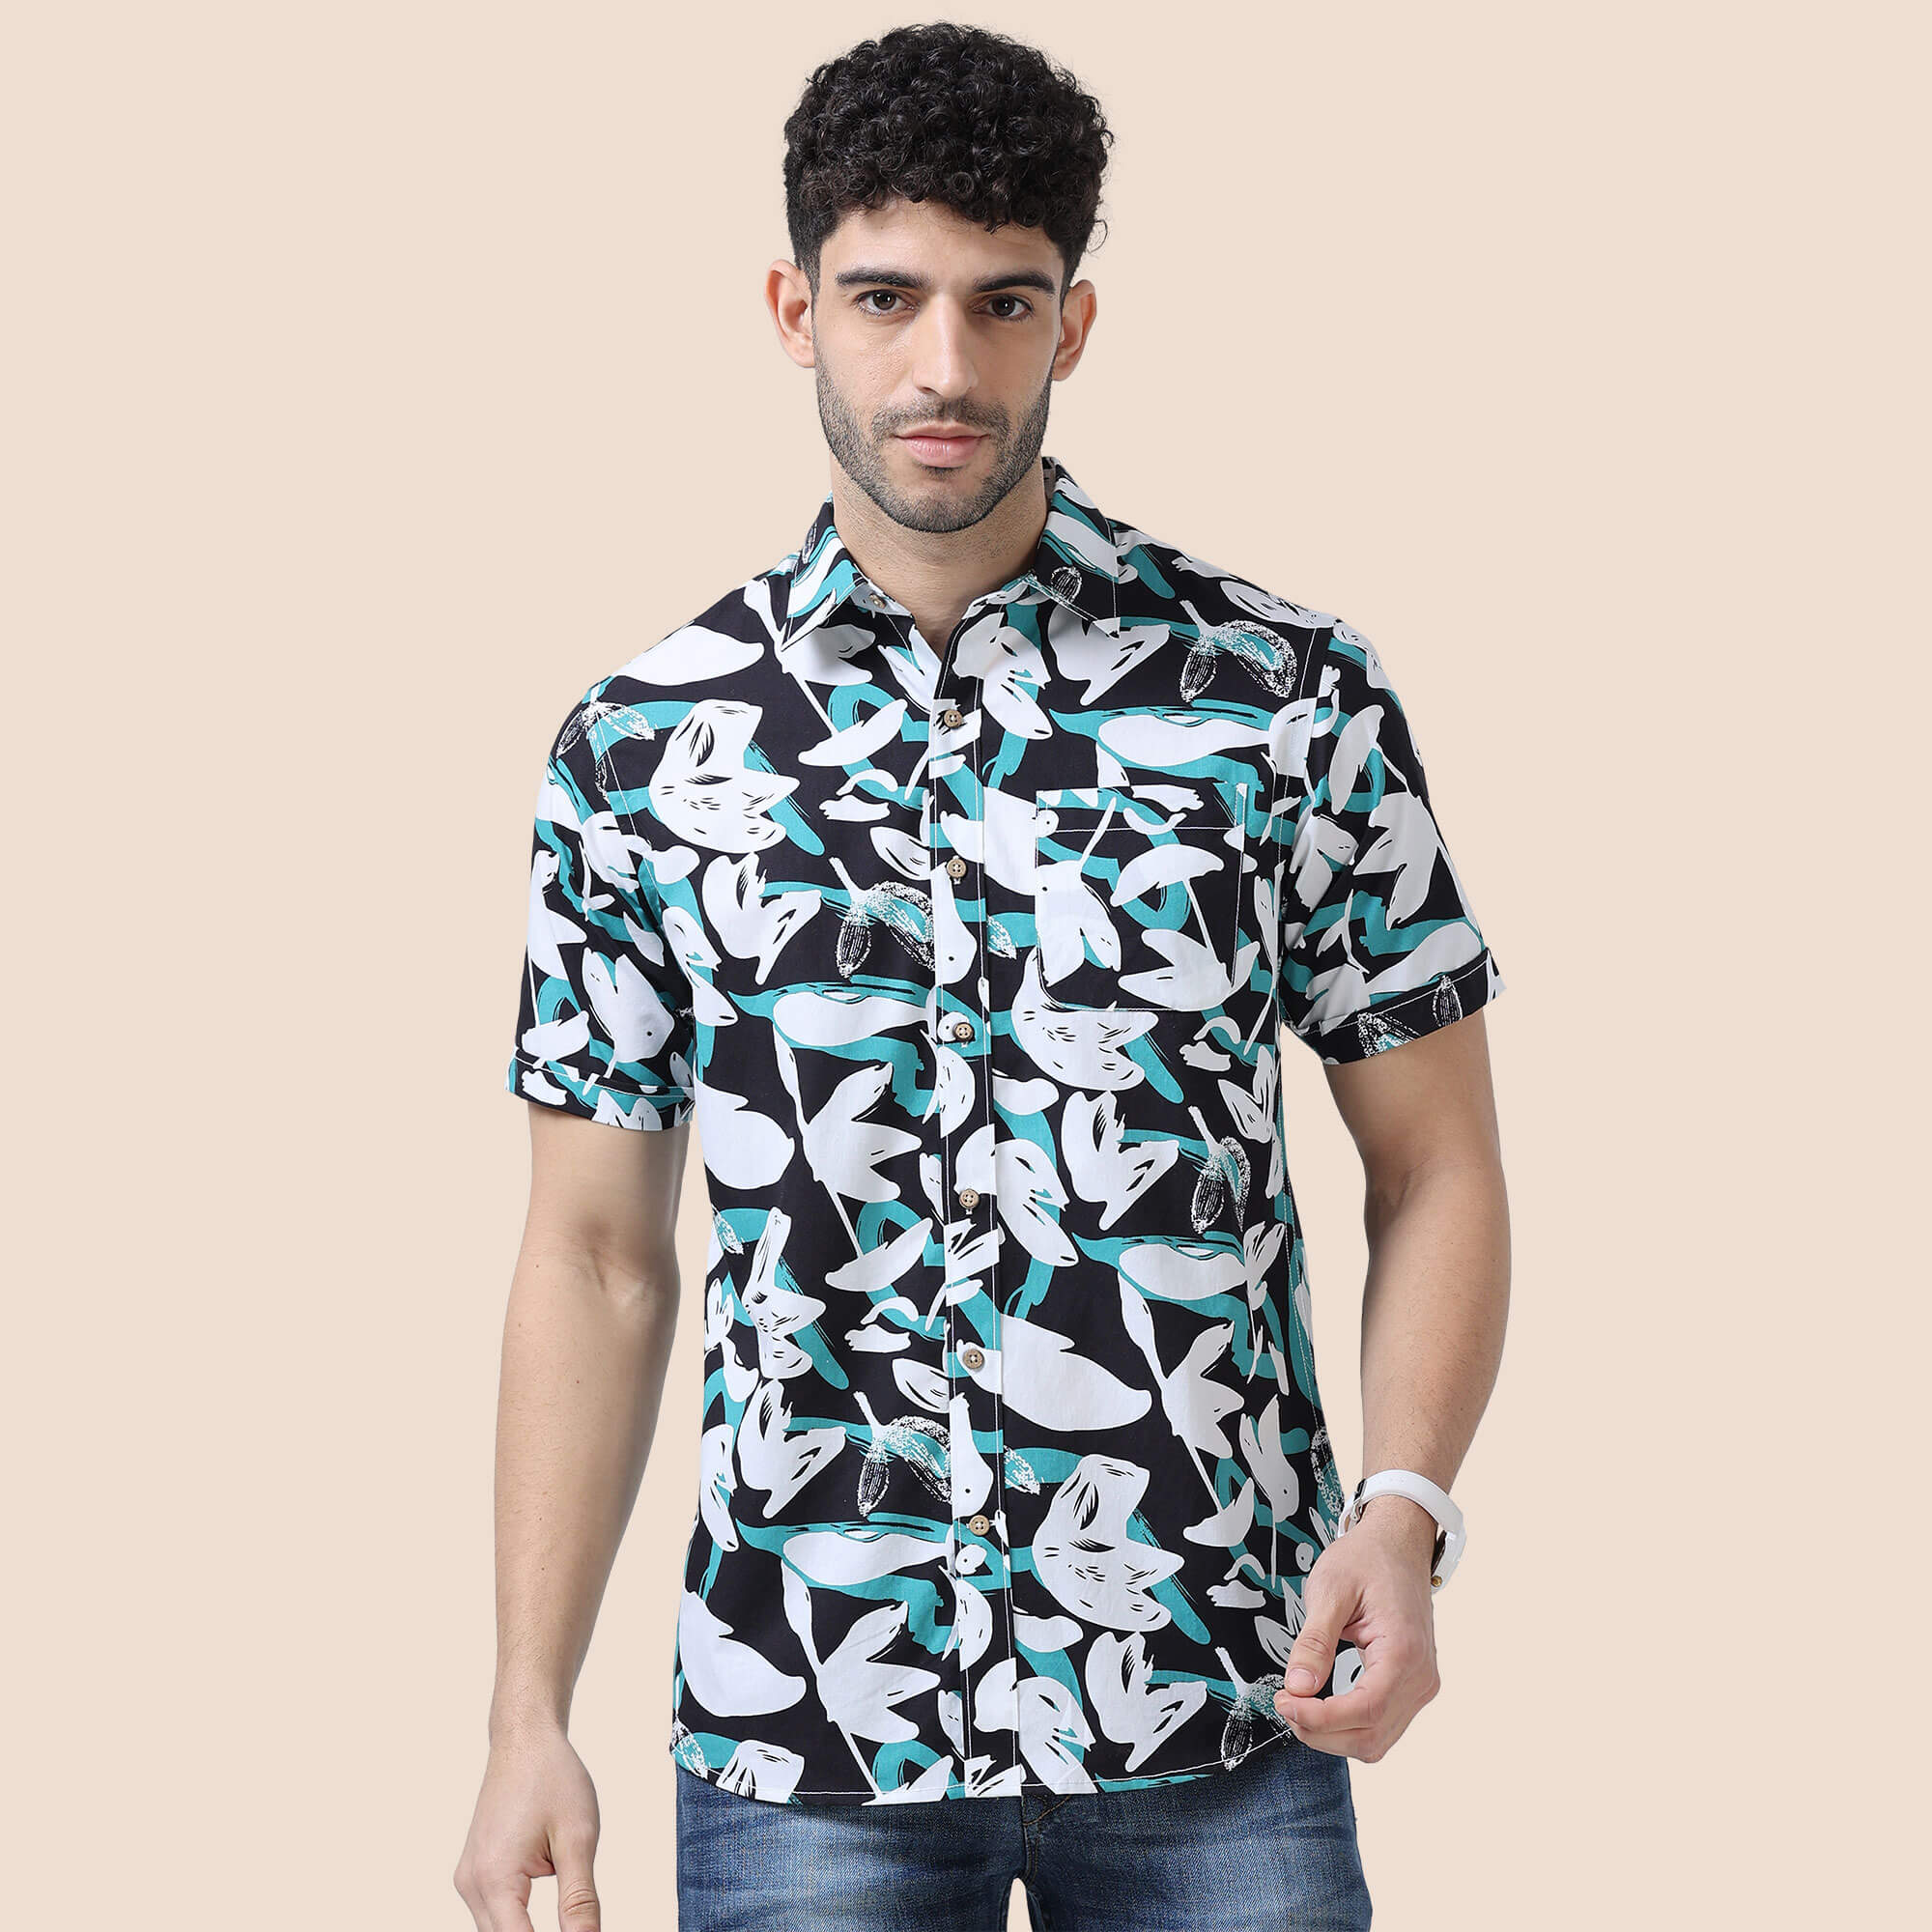 Ashley Cotton Shirt In Teal / Black Abstract Print